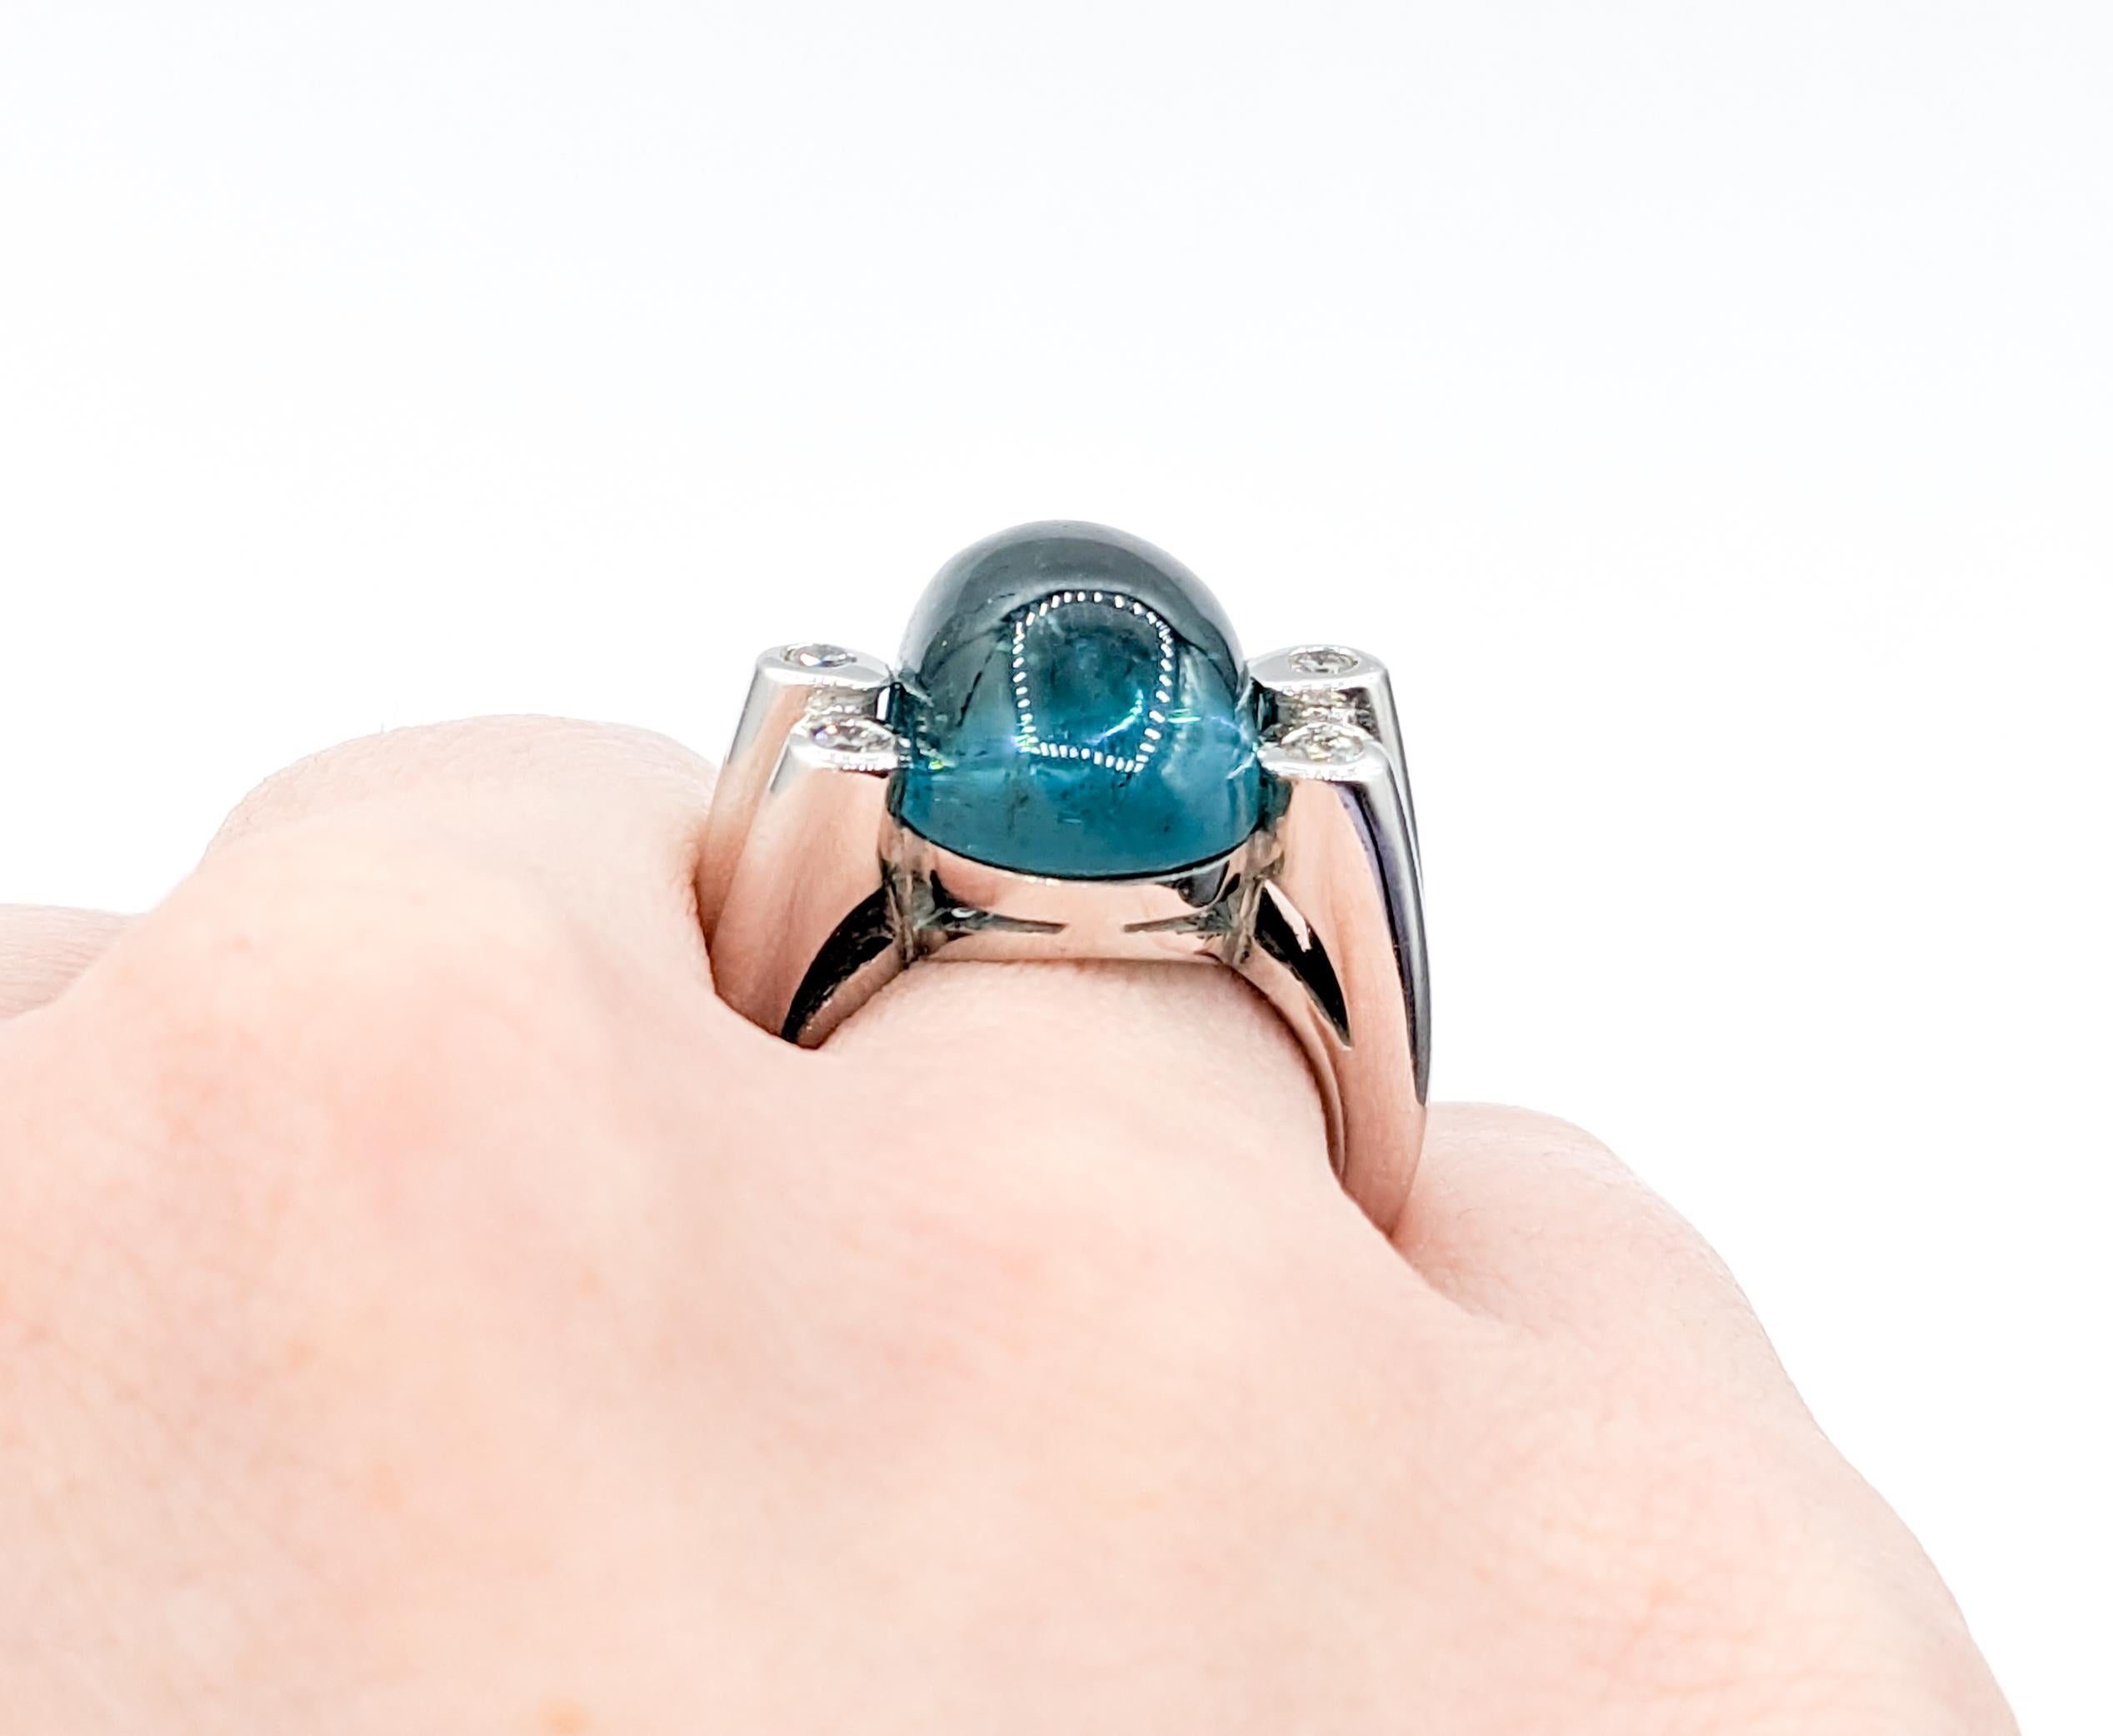 Sensational Indicolite Tourmaline & Diamond Cocktail Ring In Excellent Condition For Sale In Bloomington, MN